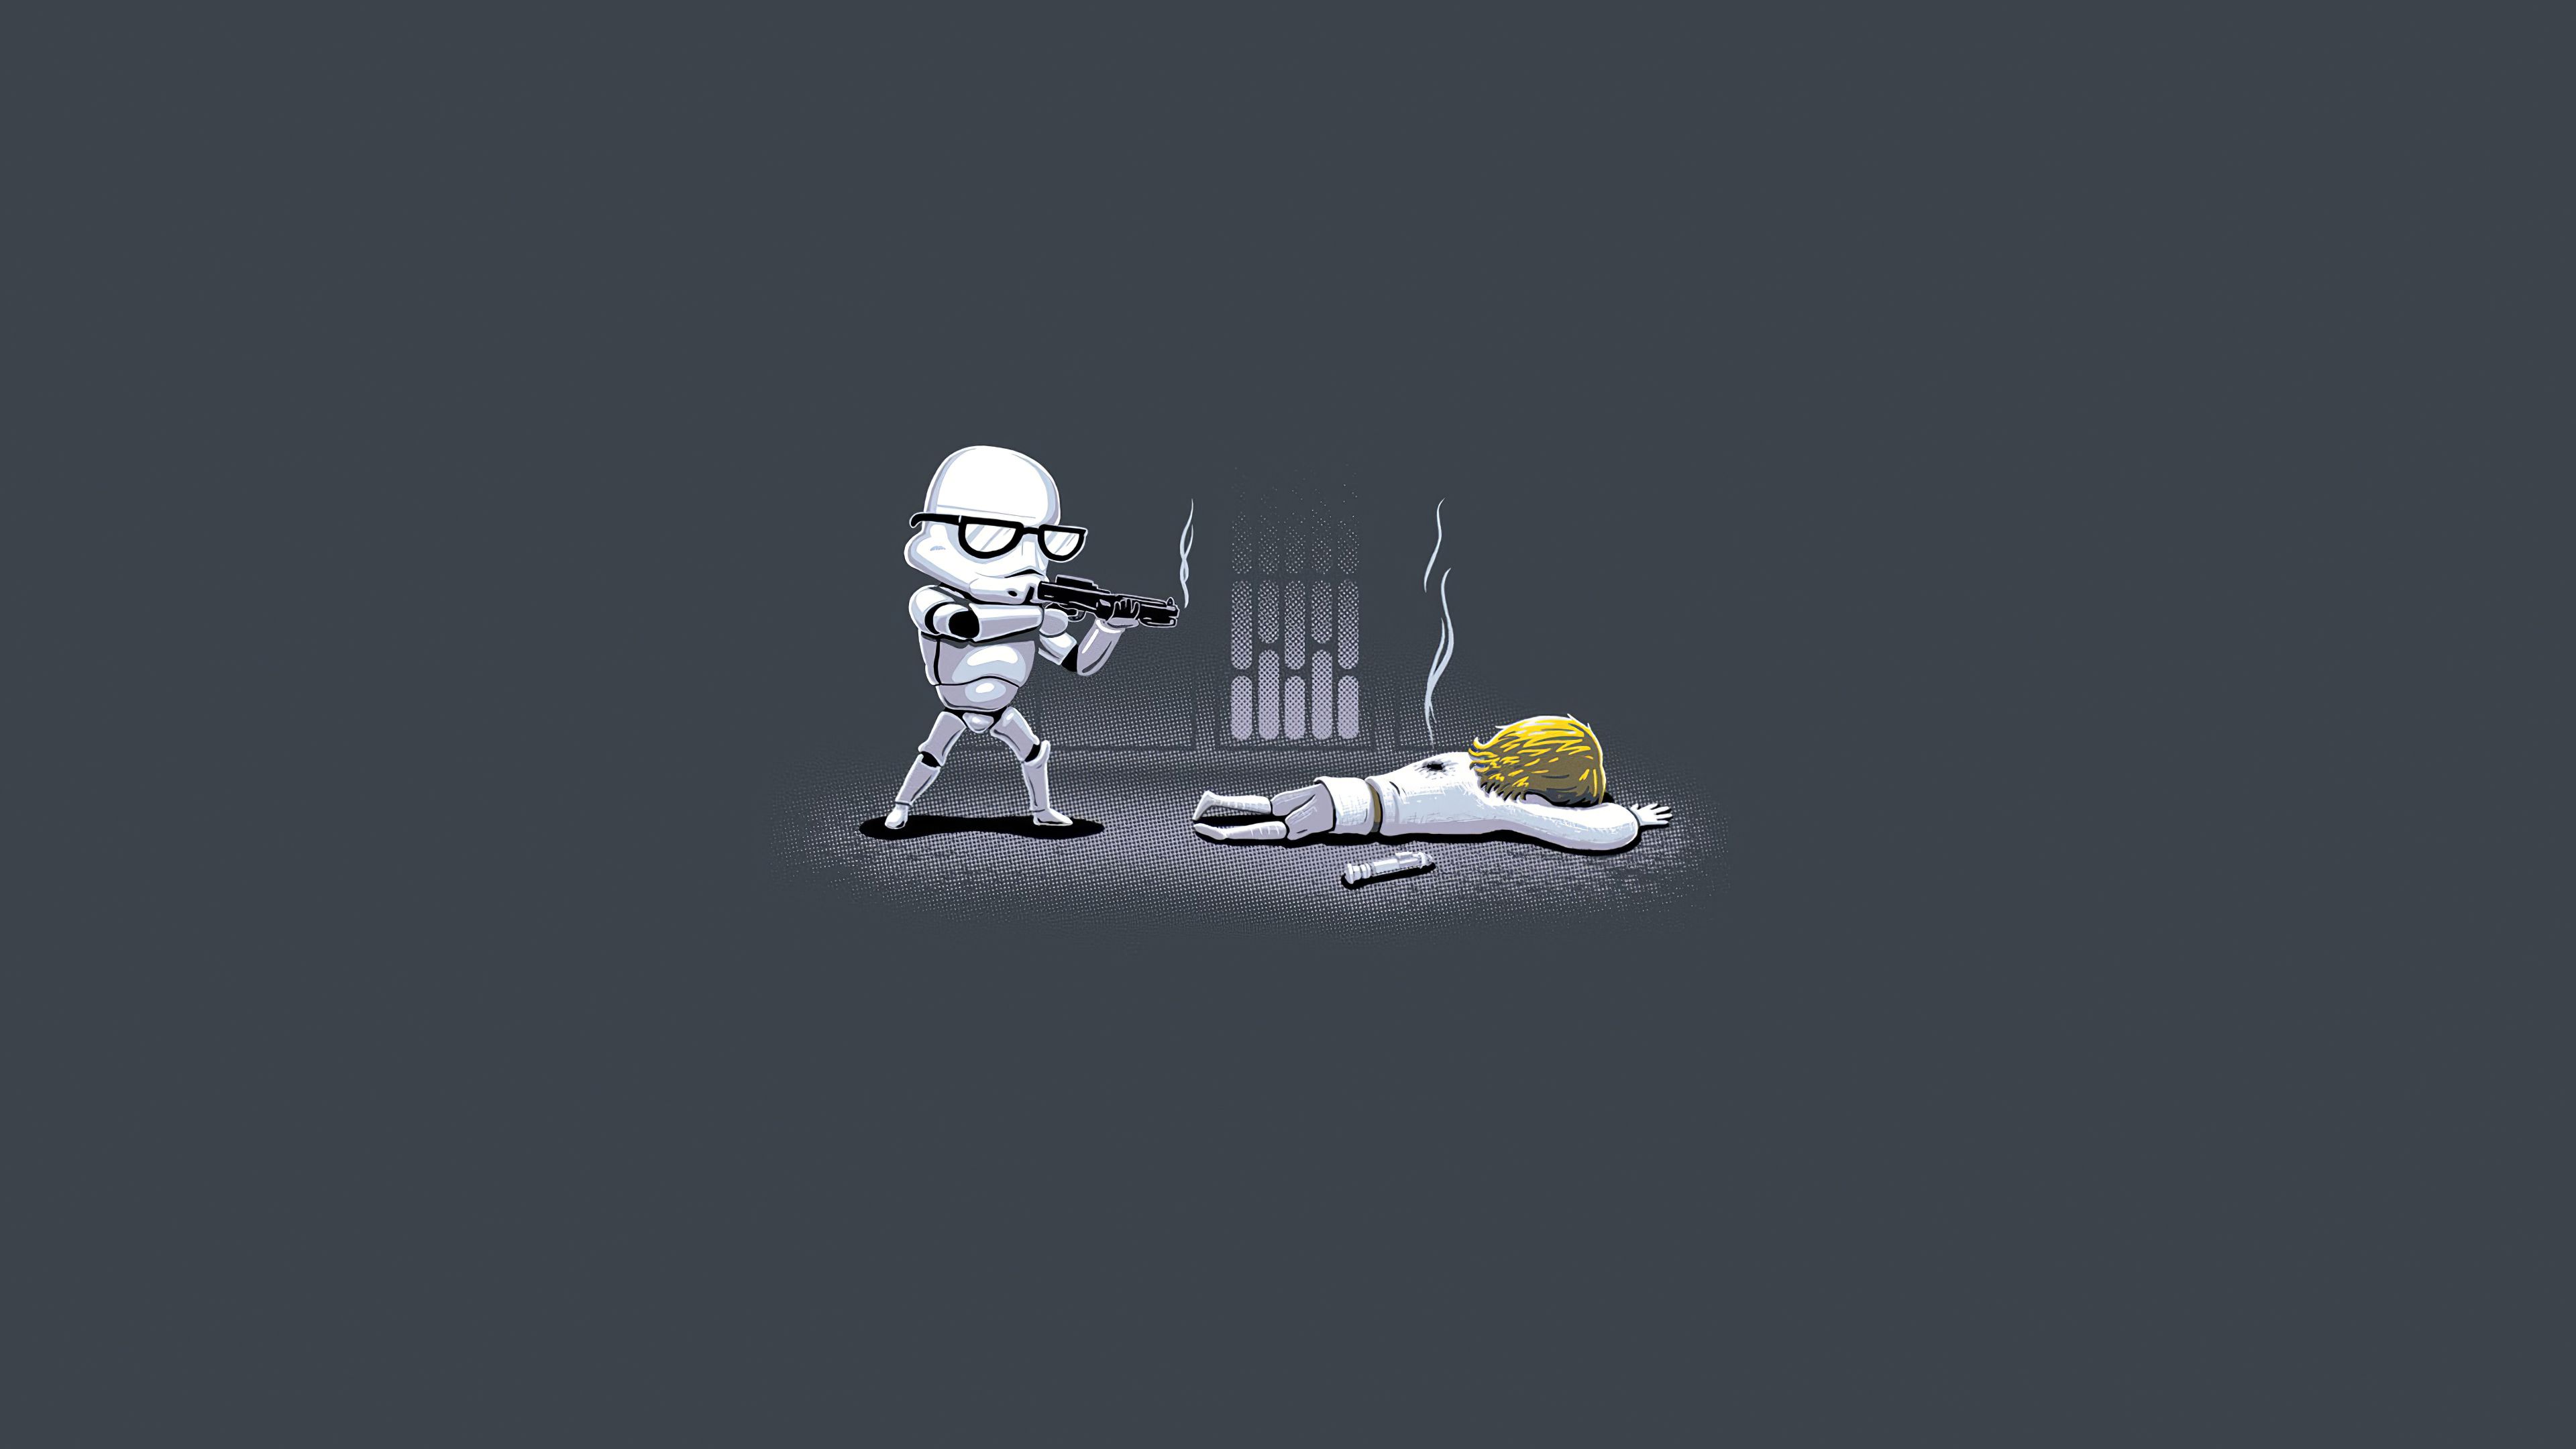 Star Wars Stormtrooper Minimal 4k, HD Artist, 4k Wallpaper, Image, Background, Photo and Picture